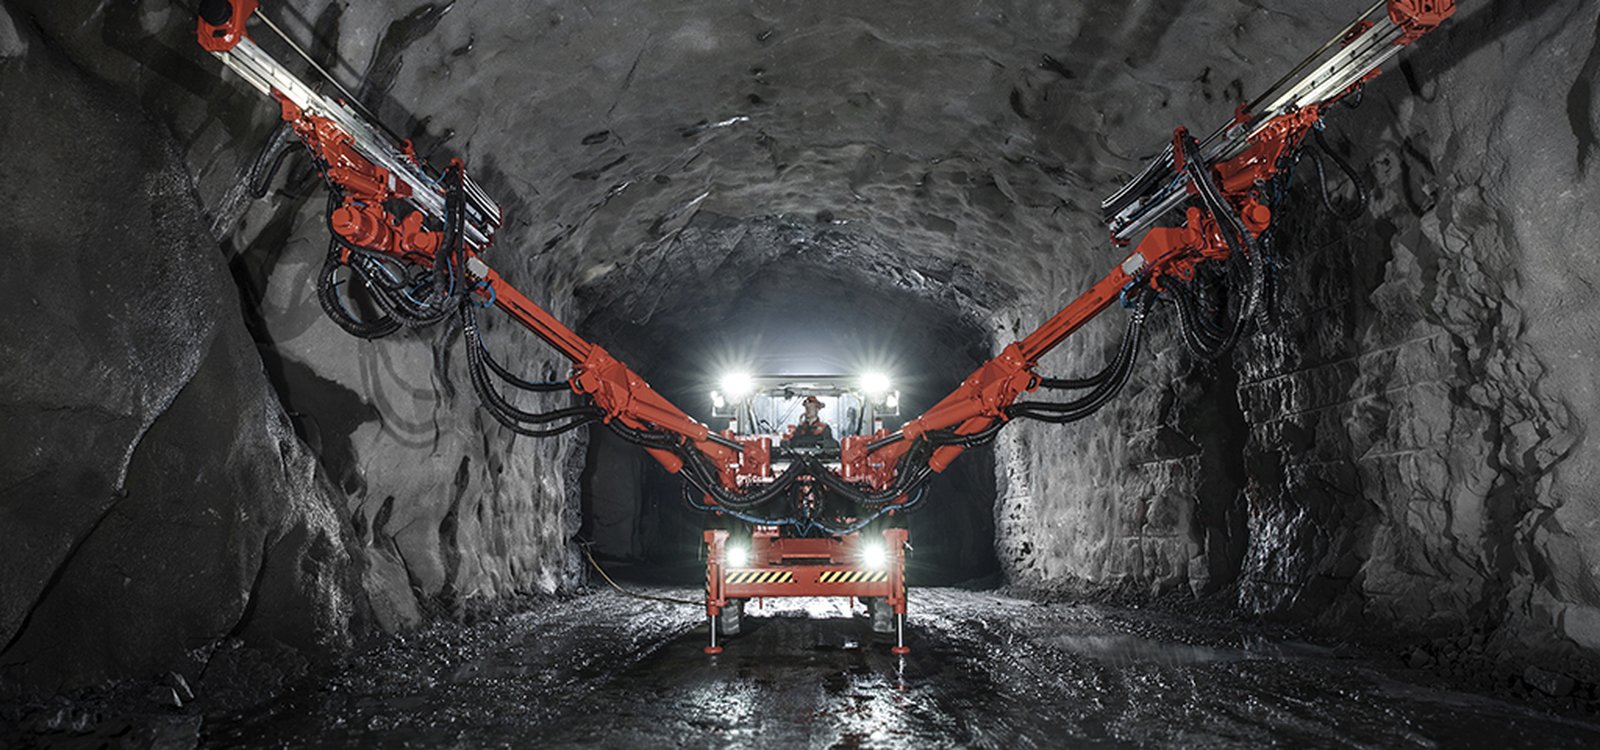 <p>Sandvik DD422i wins the Red Dot product design award for 2015, marking the second year in a row that a Sandvik Mining product has won the prestigious award. </p>
